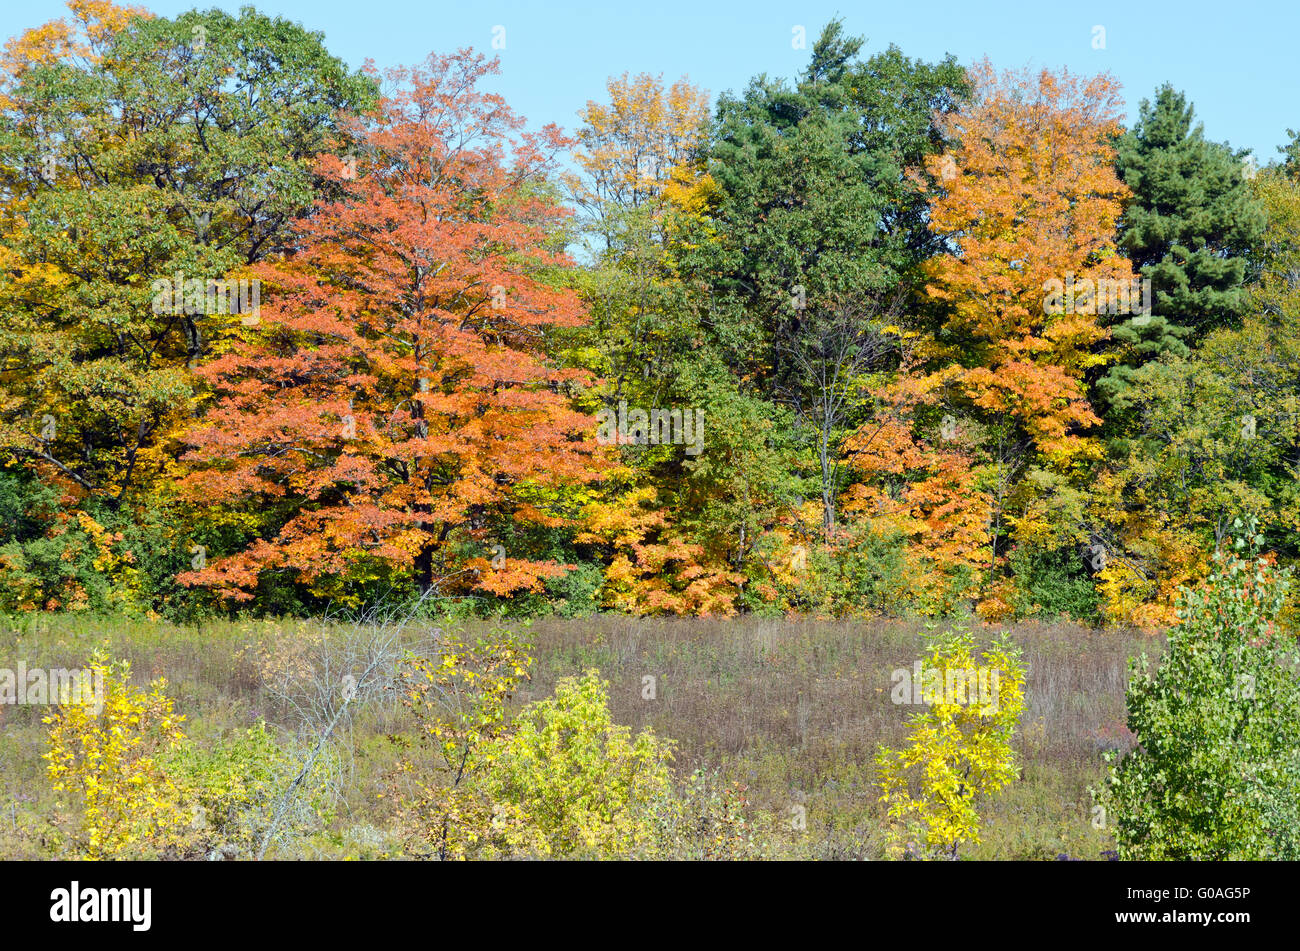 Fall's colorful trees Stock Photo